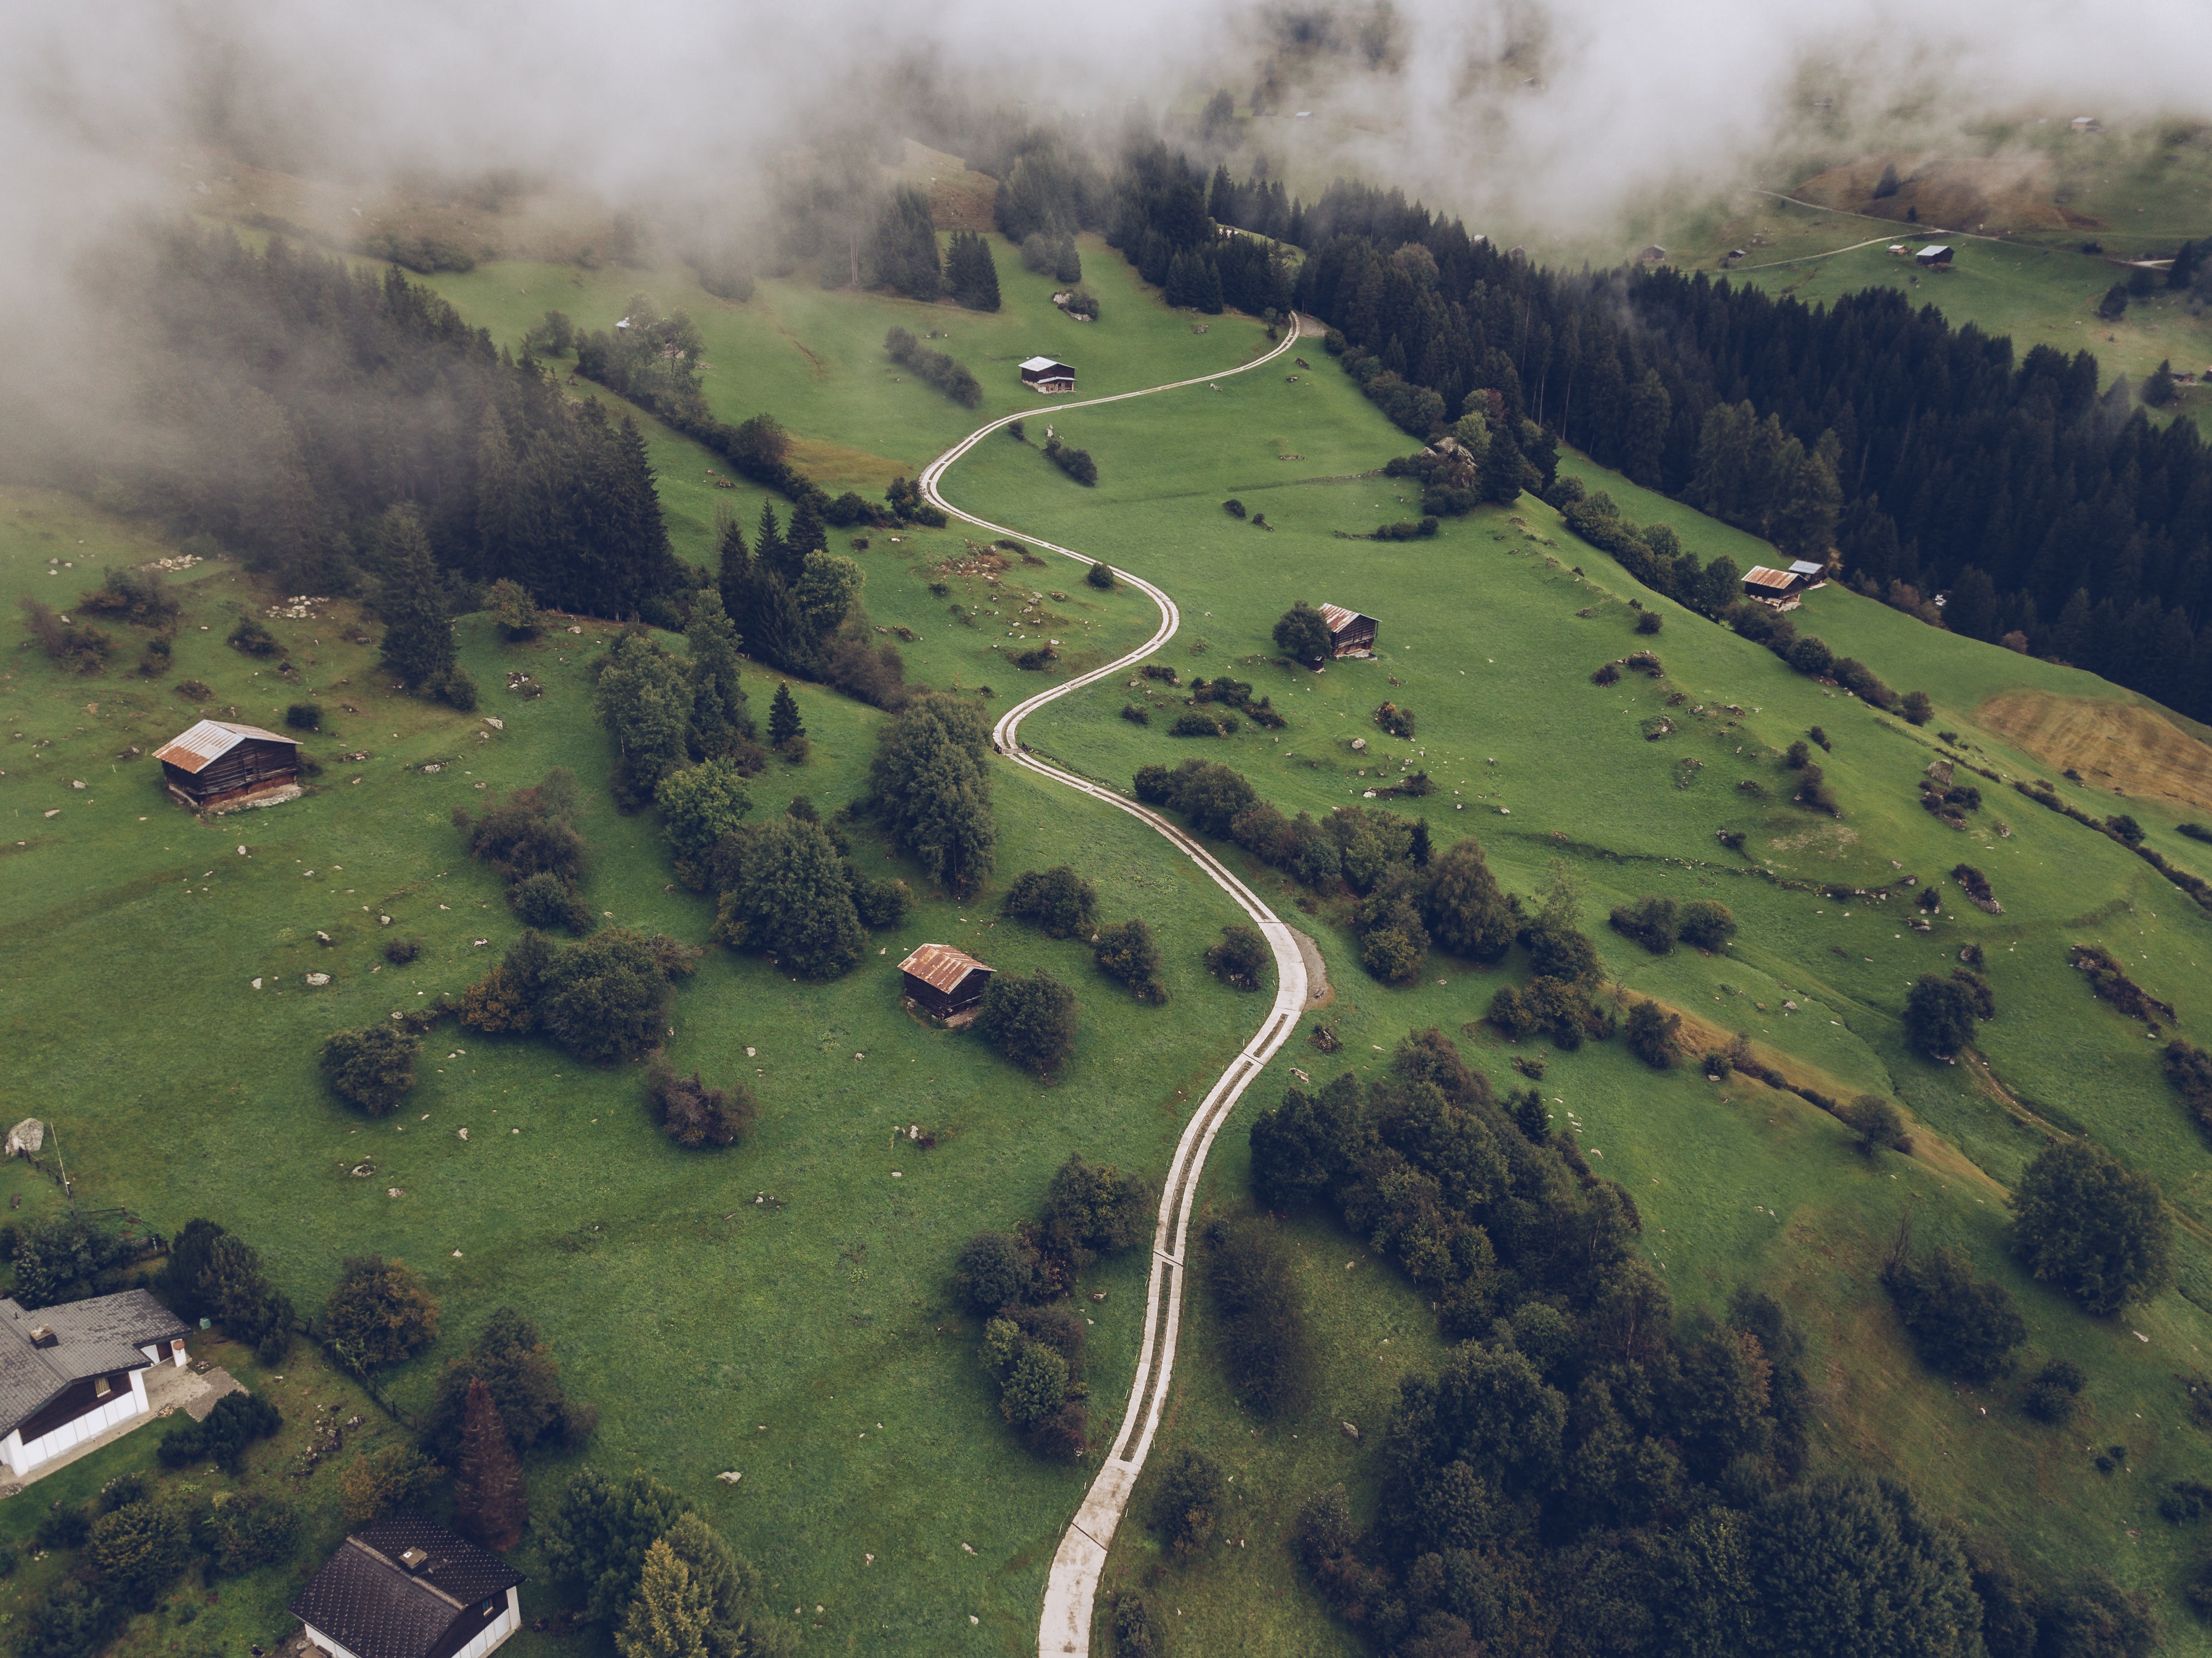 General 3982x2985 nature landscape house road clouds mist trees village aerial view drone photo Switzerland